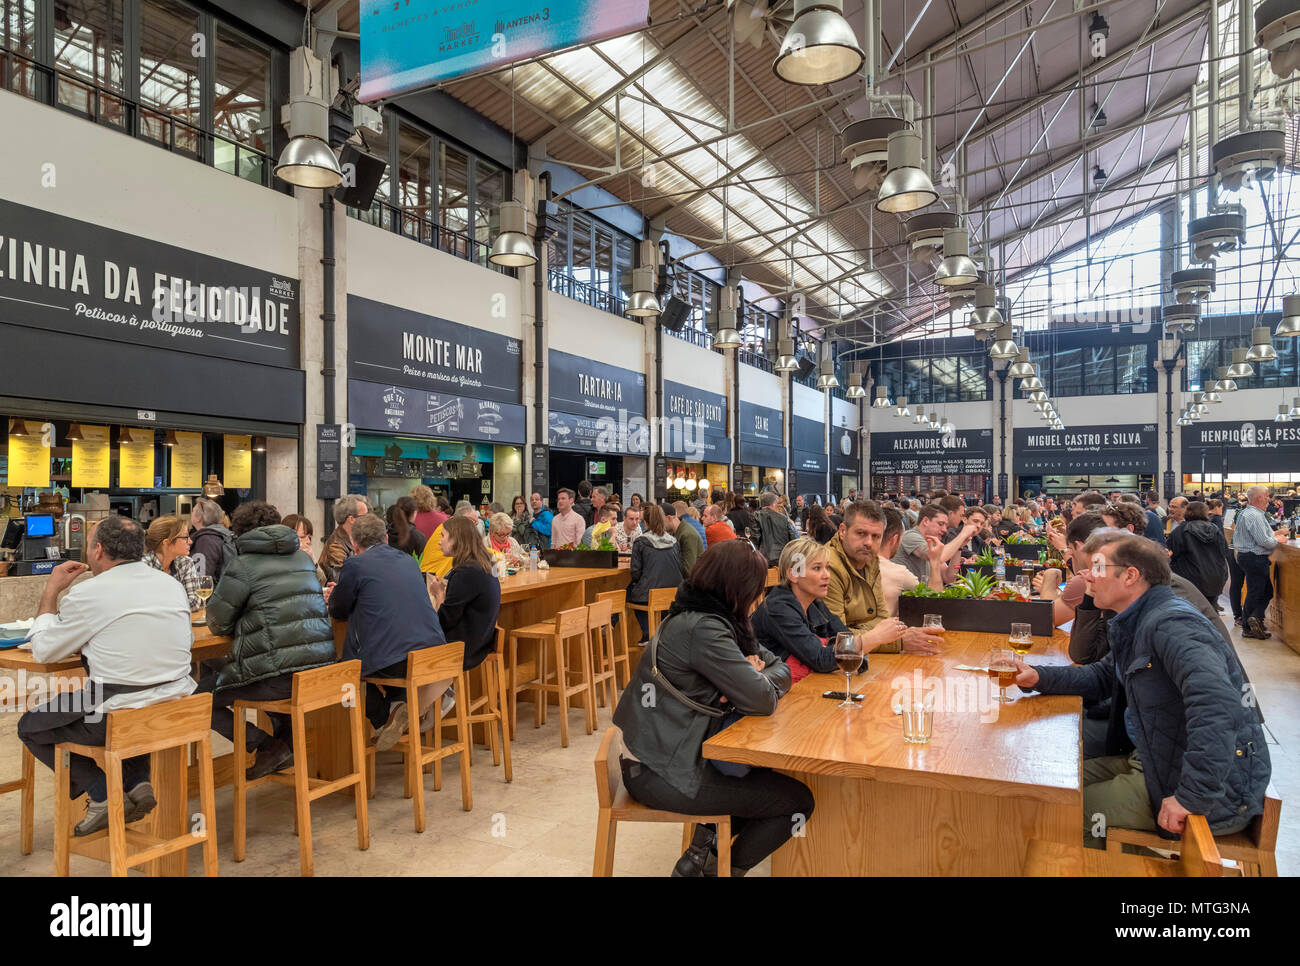 Cafes and bars in the Time Out Market food hall, Mercado da Ribeira, Lisbon, Portugal Stock Photo